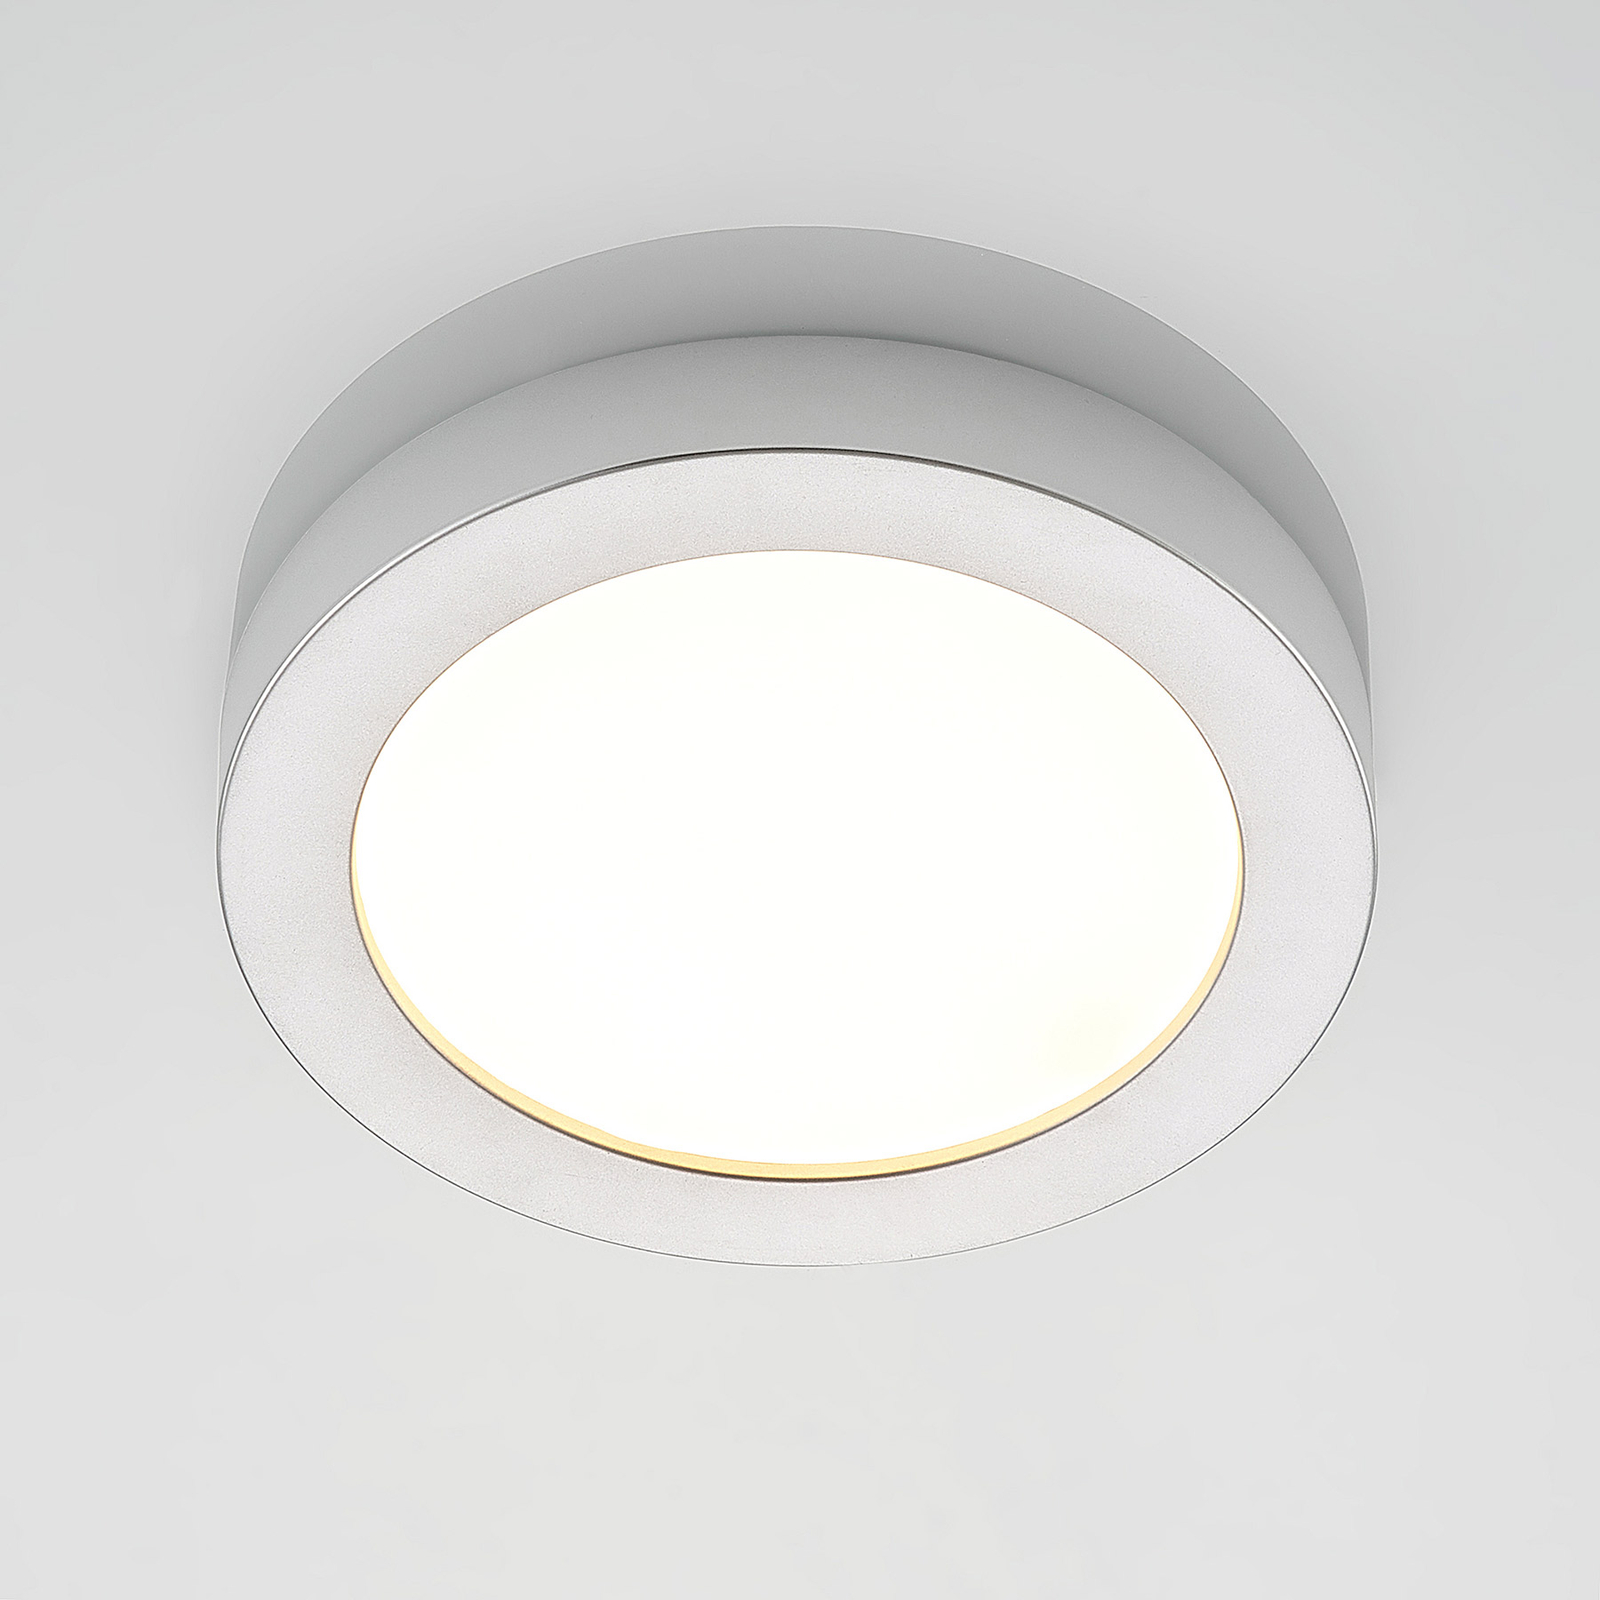 Prios LED ceiling light Edwina, silver, 24.5 cm, dimmable